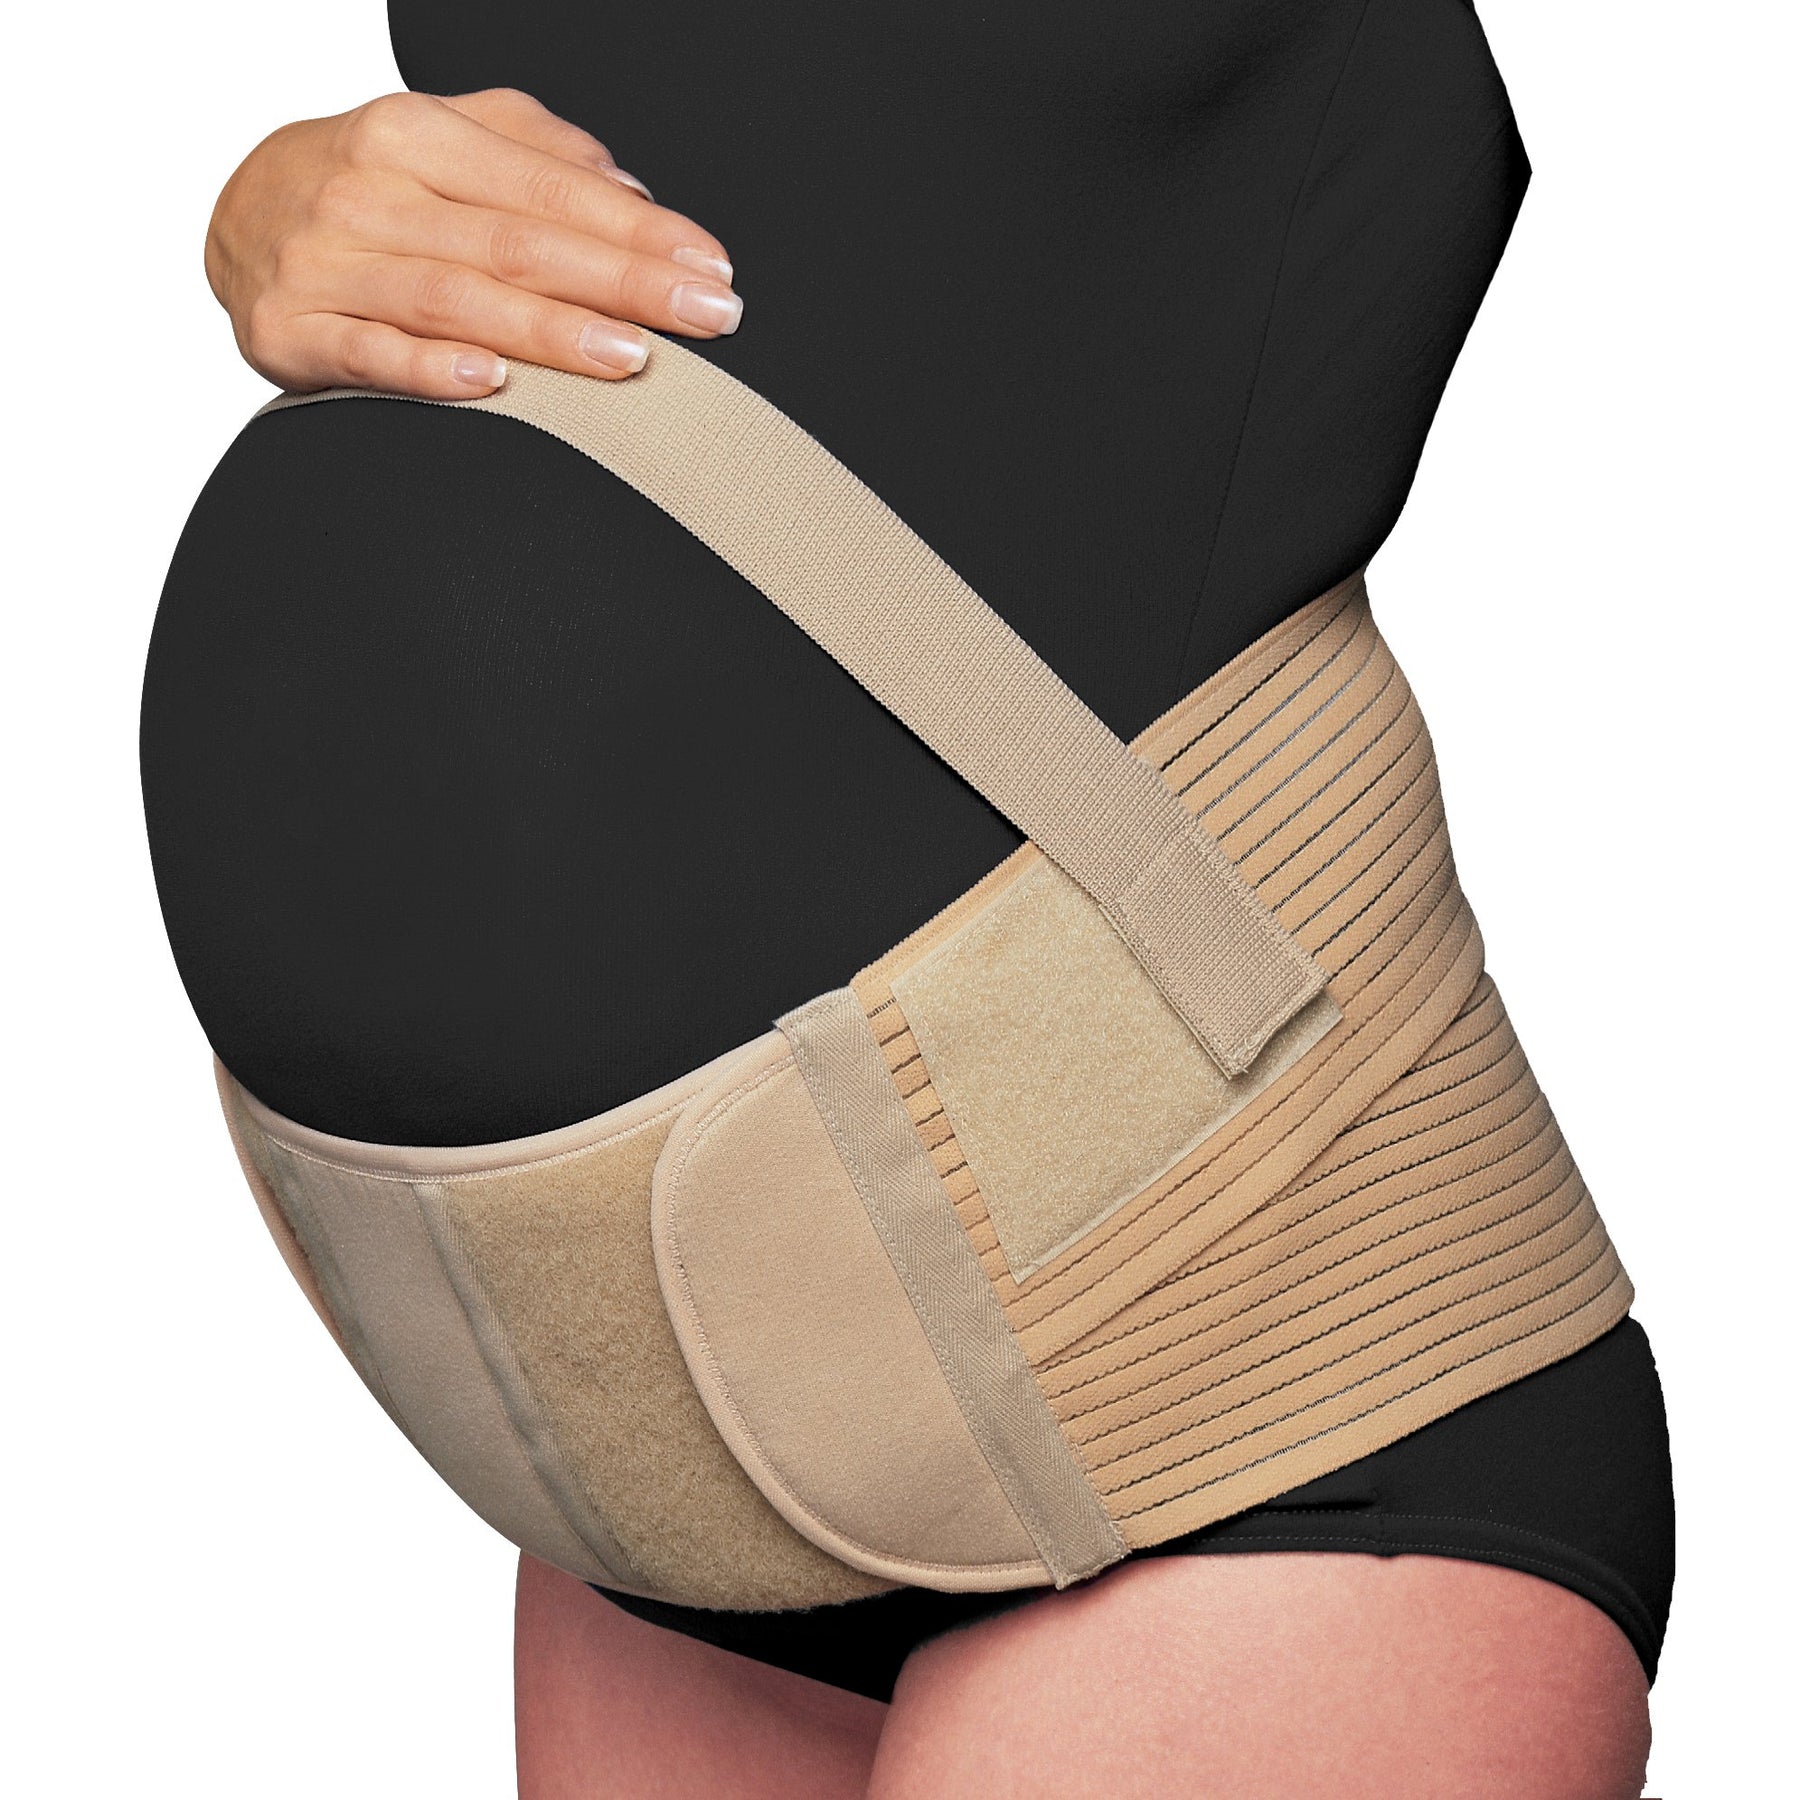 OTC MATERNITY ELASTIC SUP BEIGE SM - Wellwise by Shoppers